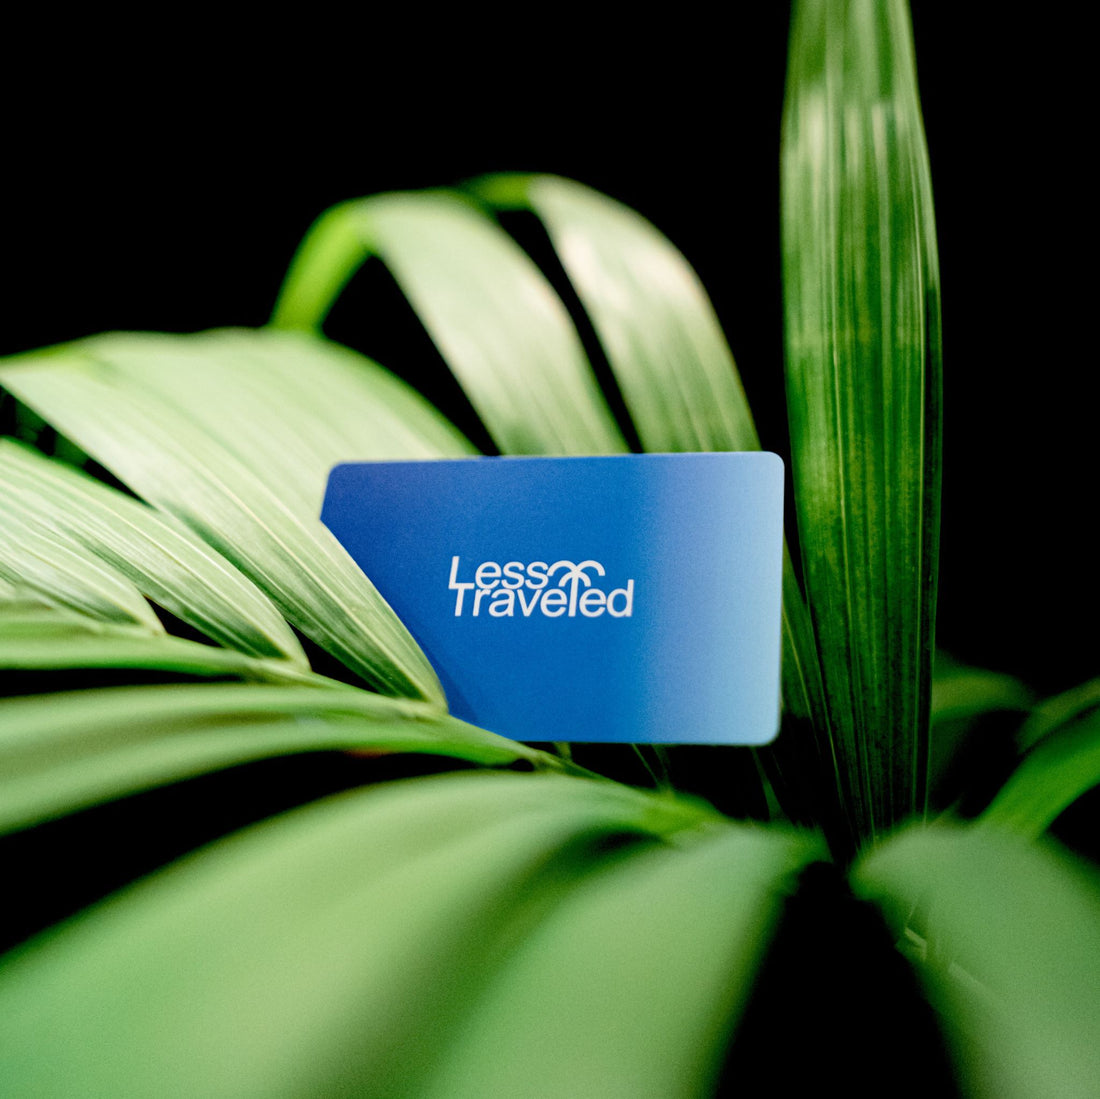 blue digital business card using nfc technology for networking